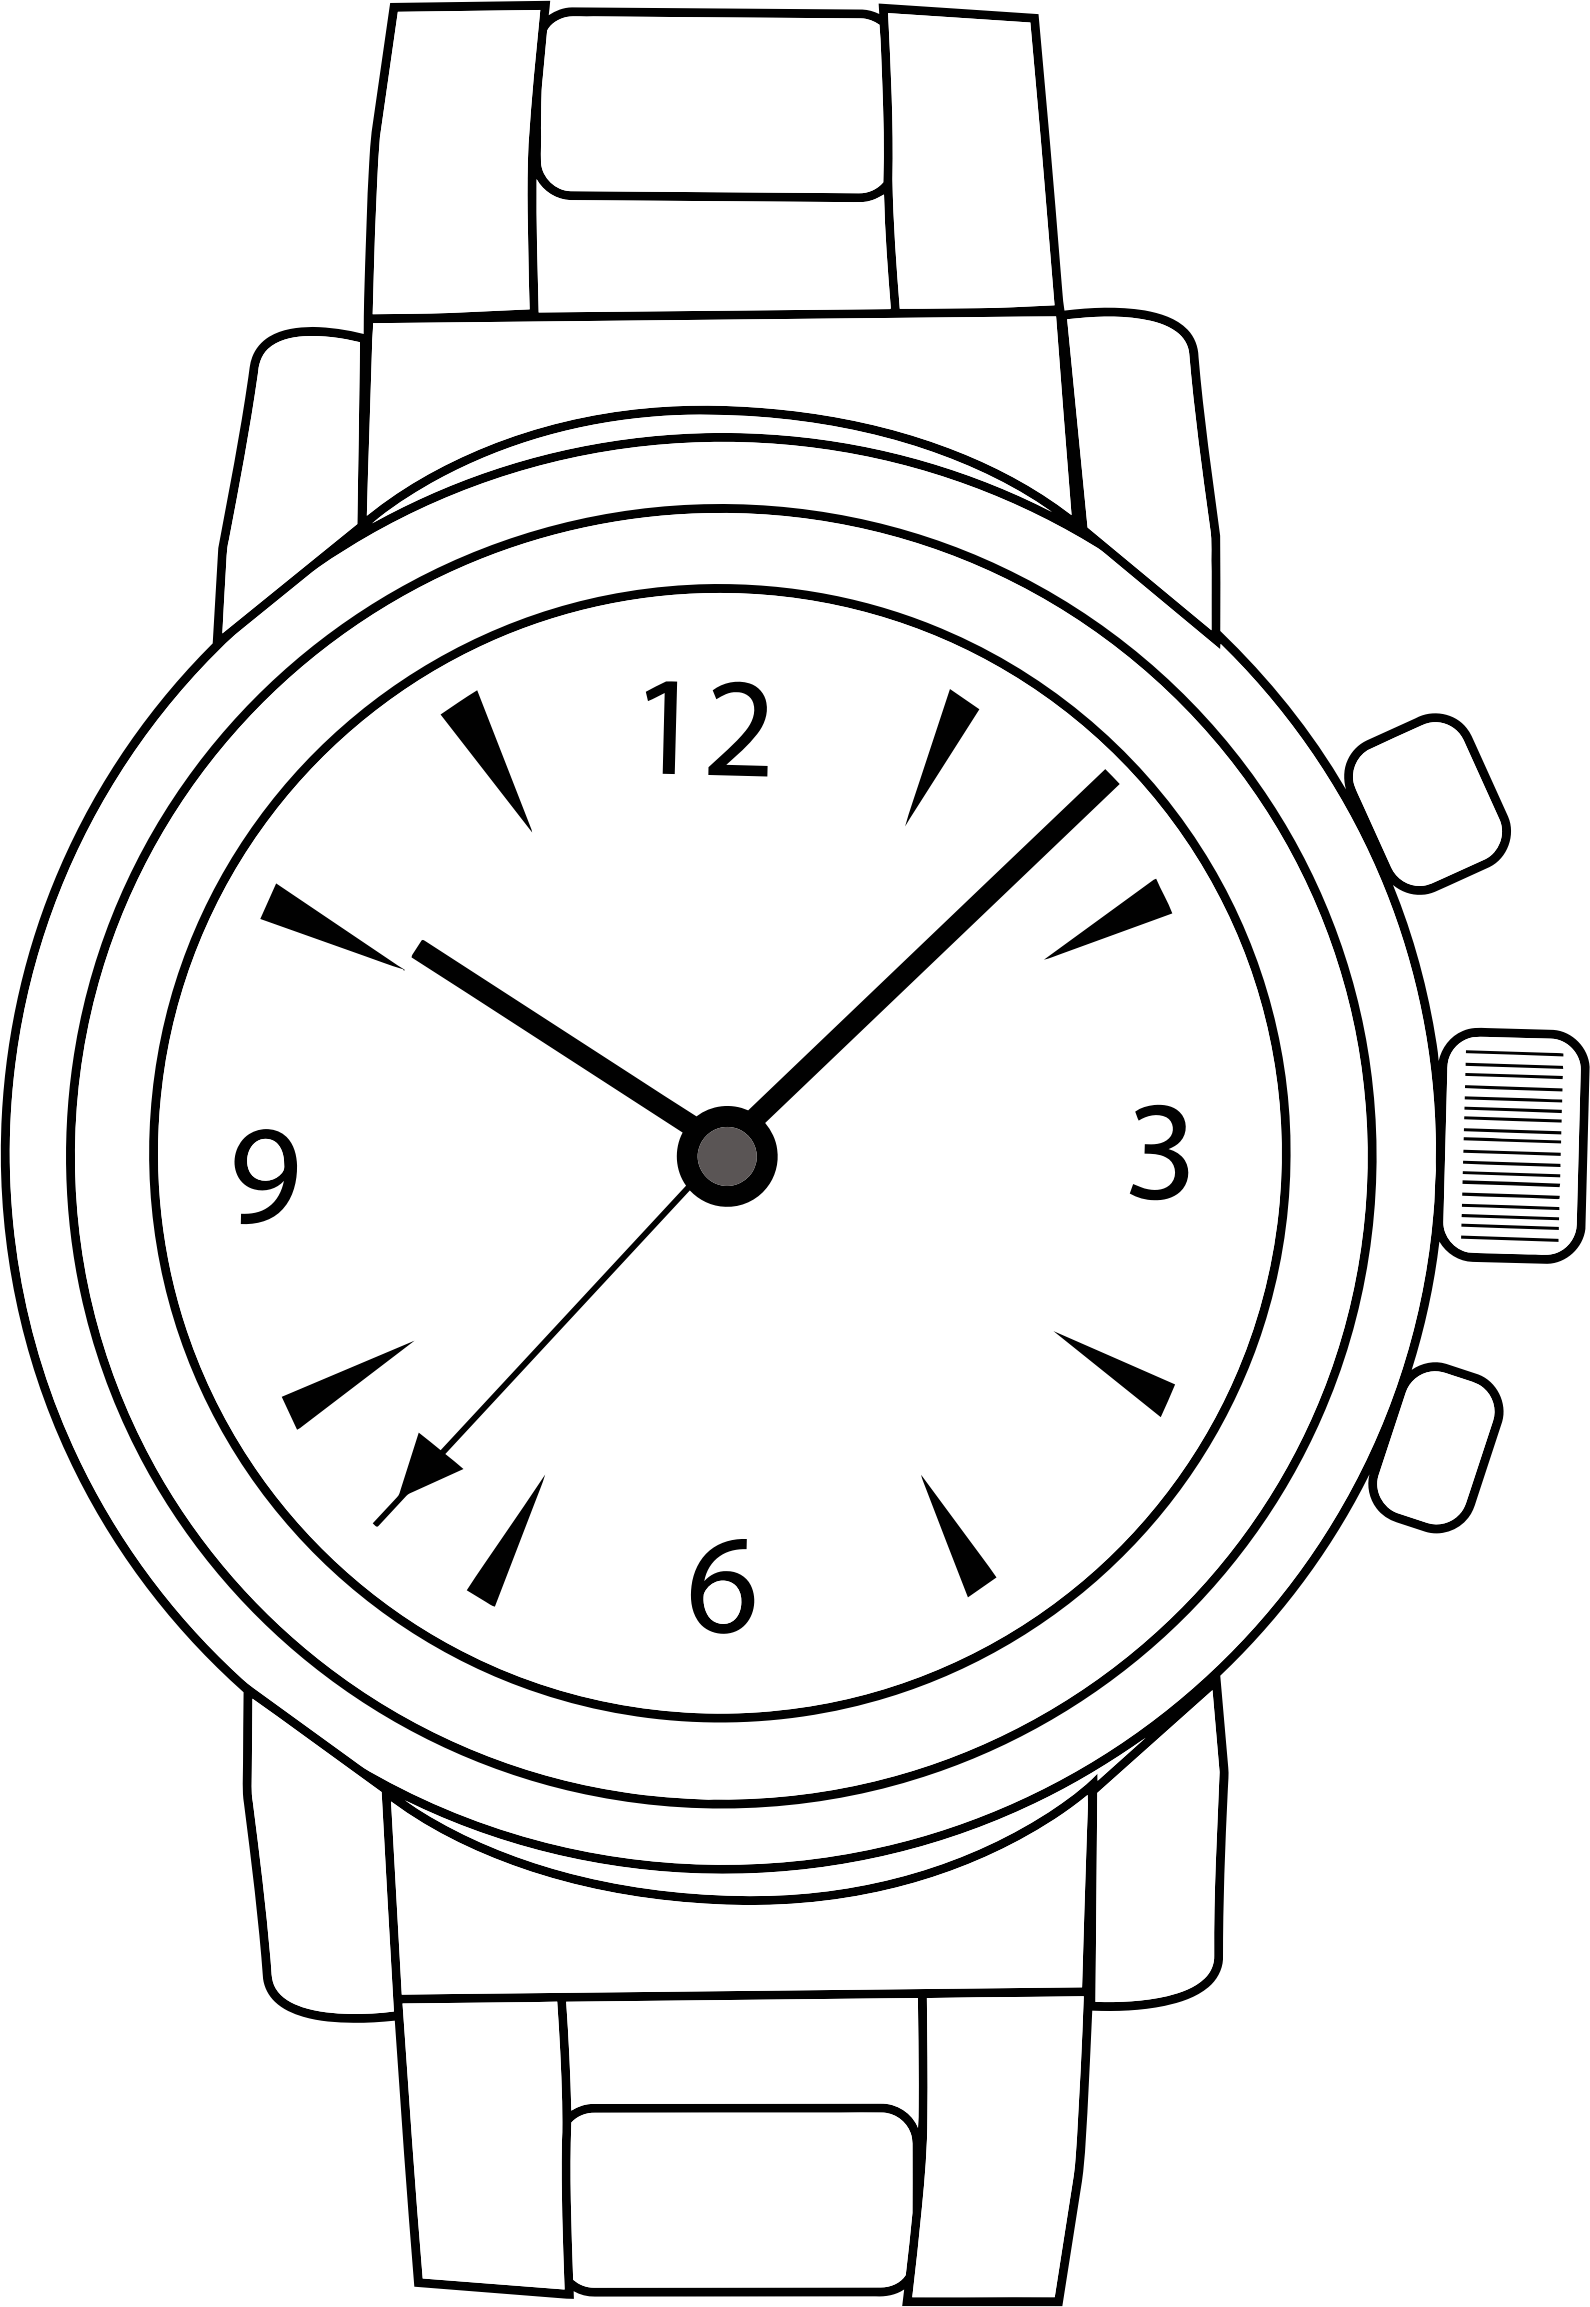 watch clipart black and white - photo #4